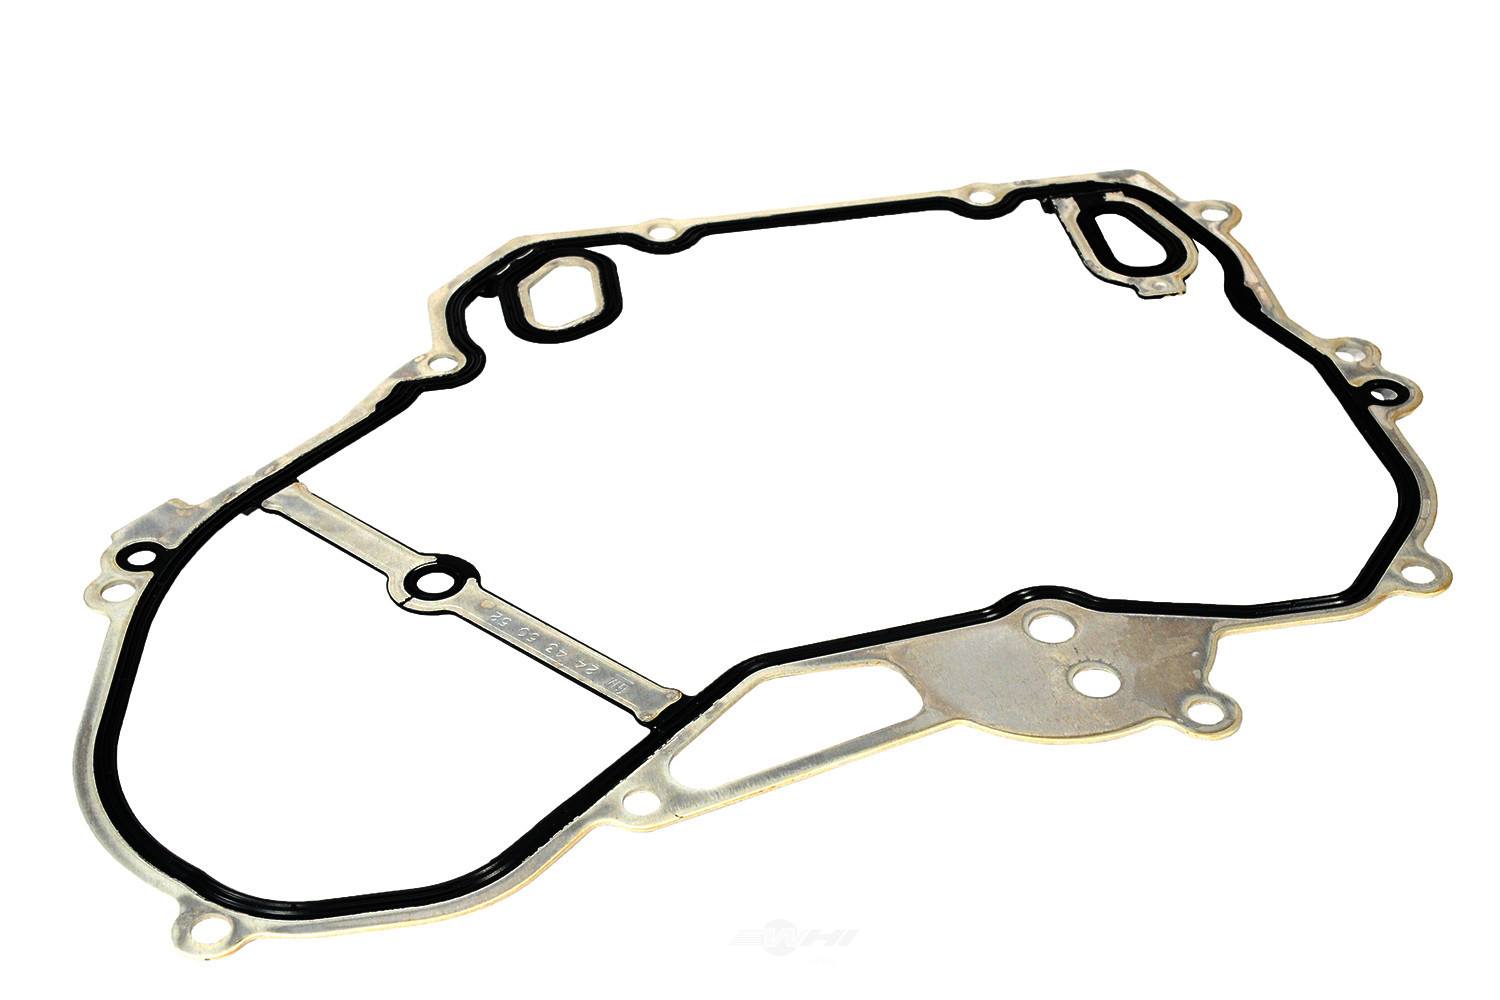 GM GENUINE PARTS - Engine Timing Cover Gasket - GMP 24435052